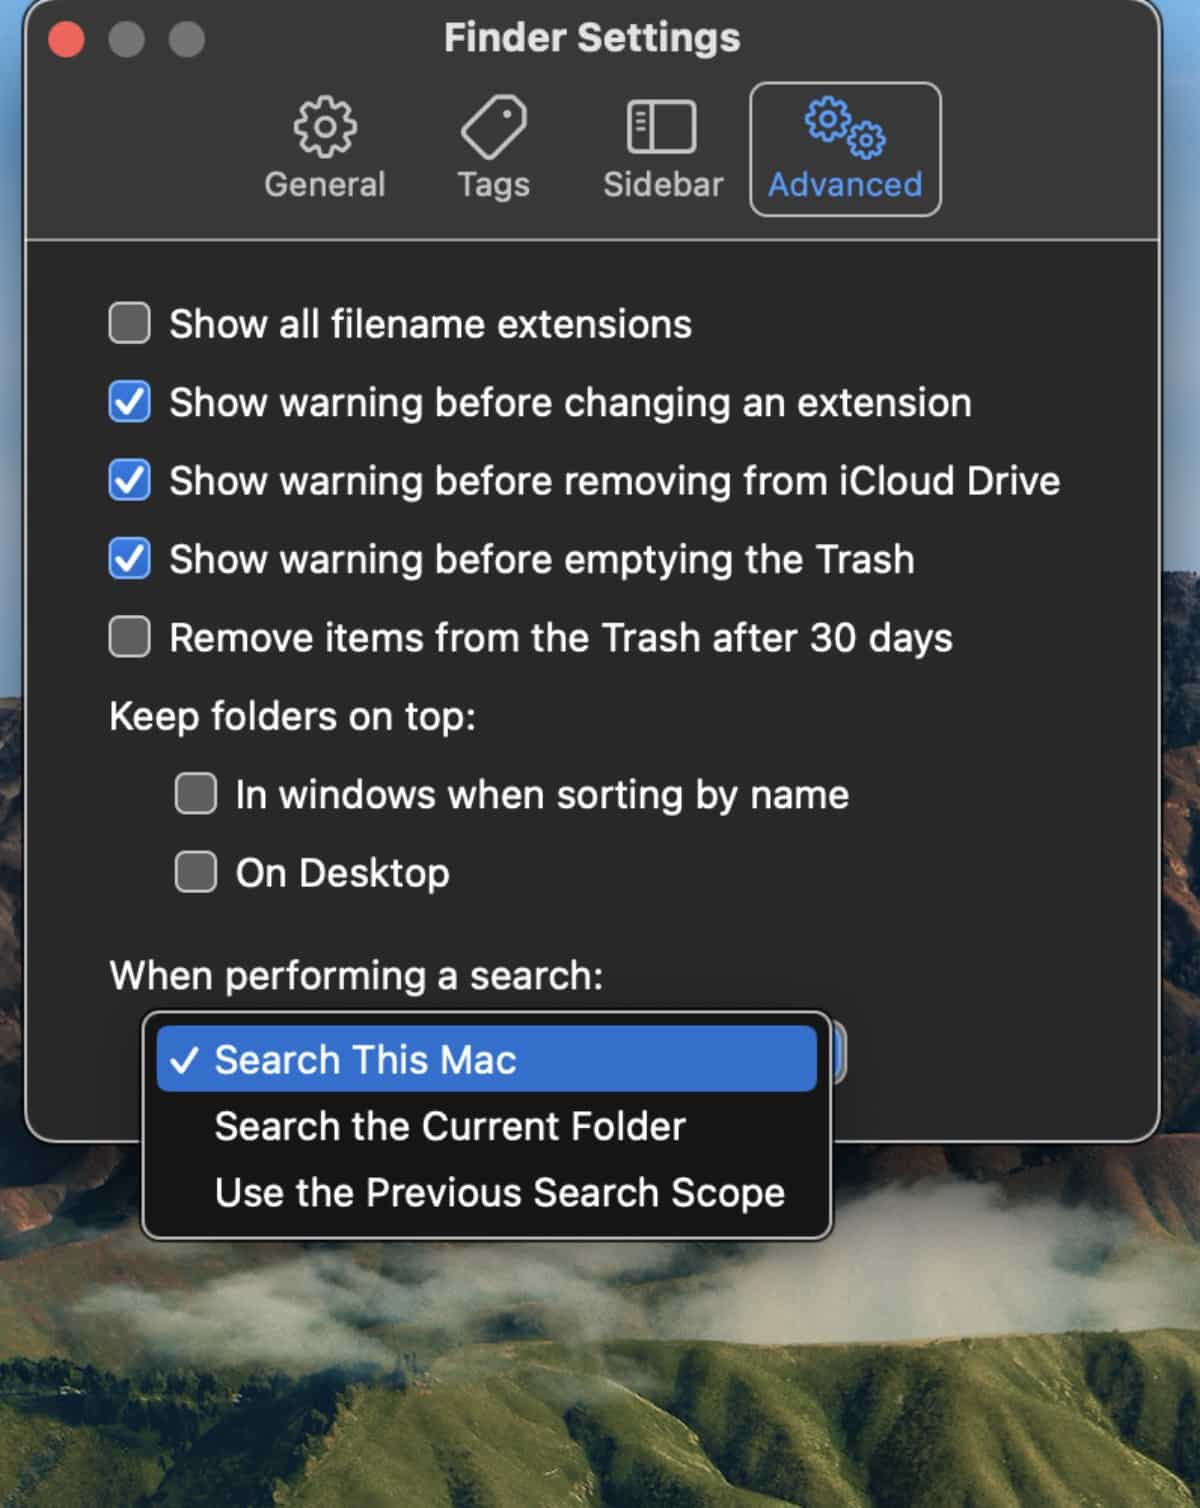 Performing Search Options